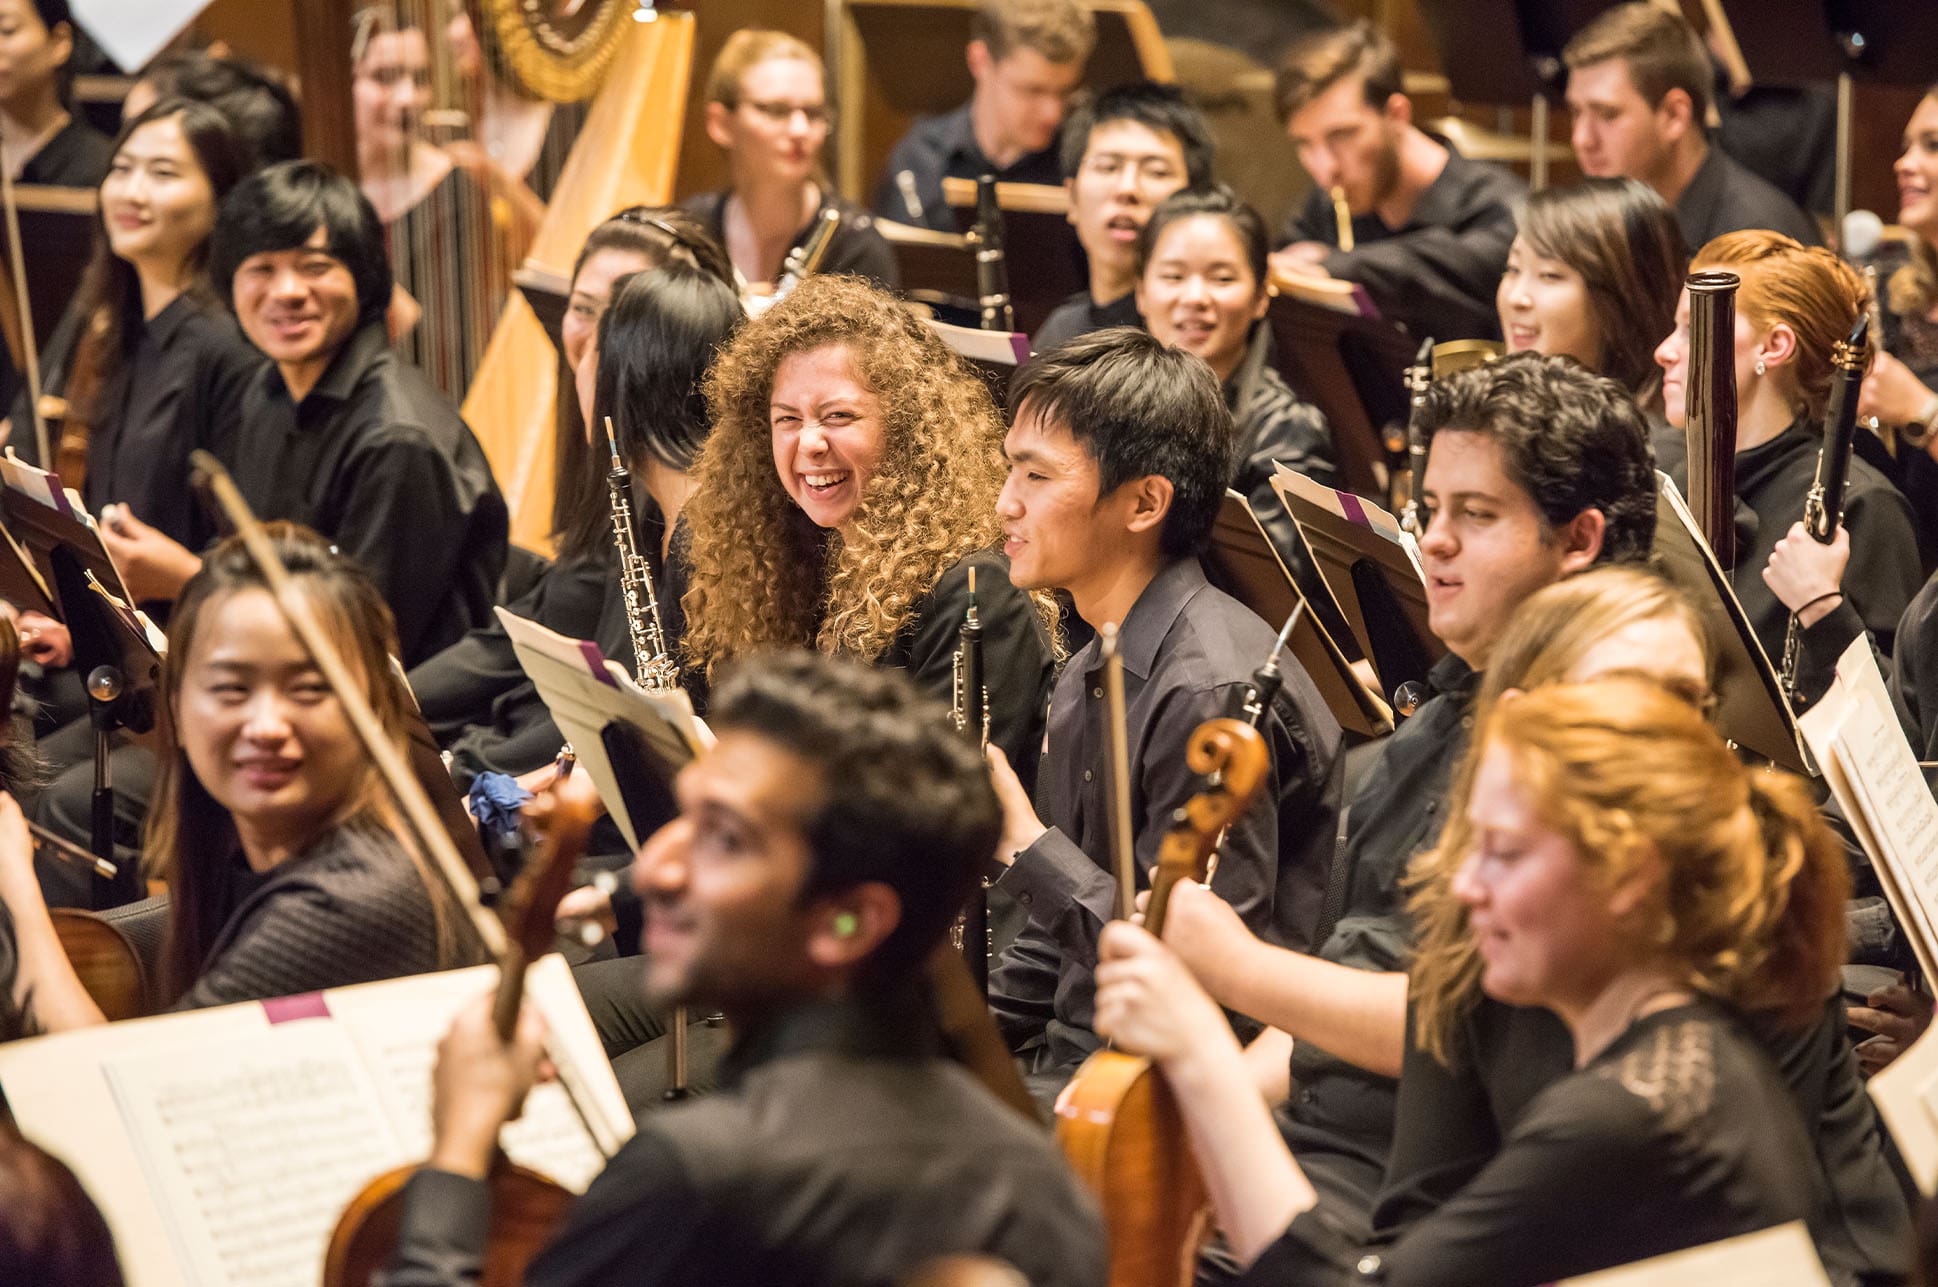 Students sitting together in an orchestra.